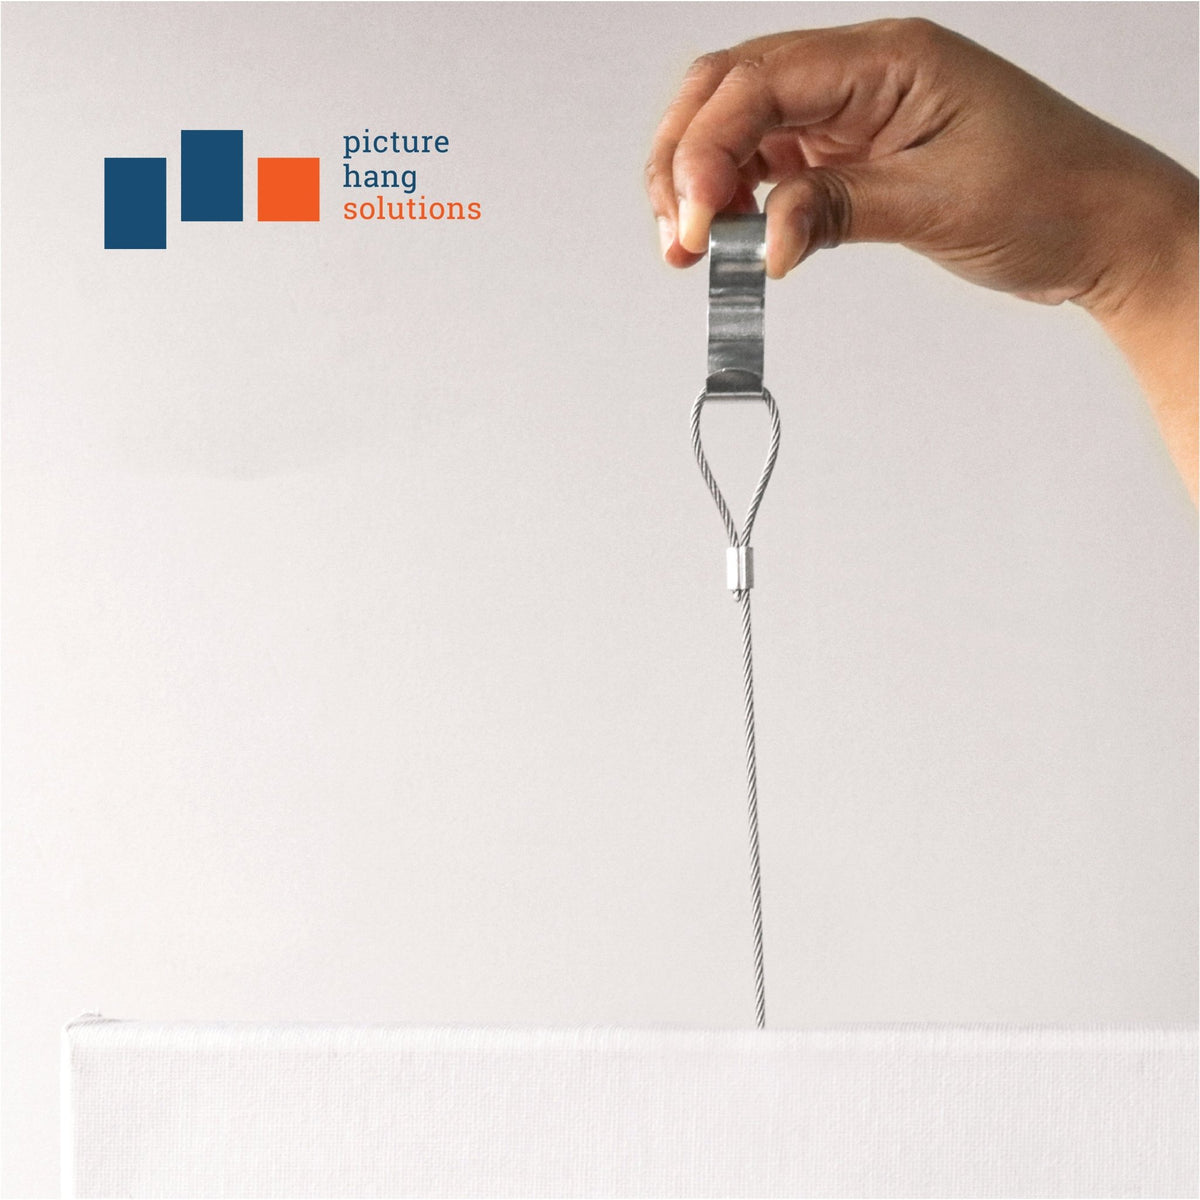 Gallery Kit with Silver Picture Rail Hooks - GSK-Z44 - Picture Hang Solutions